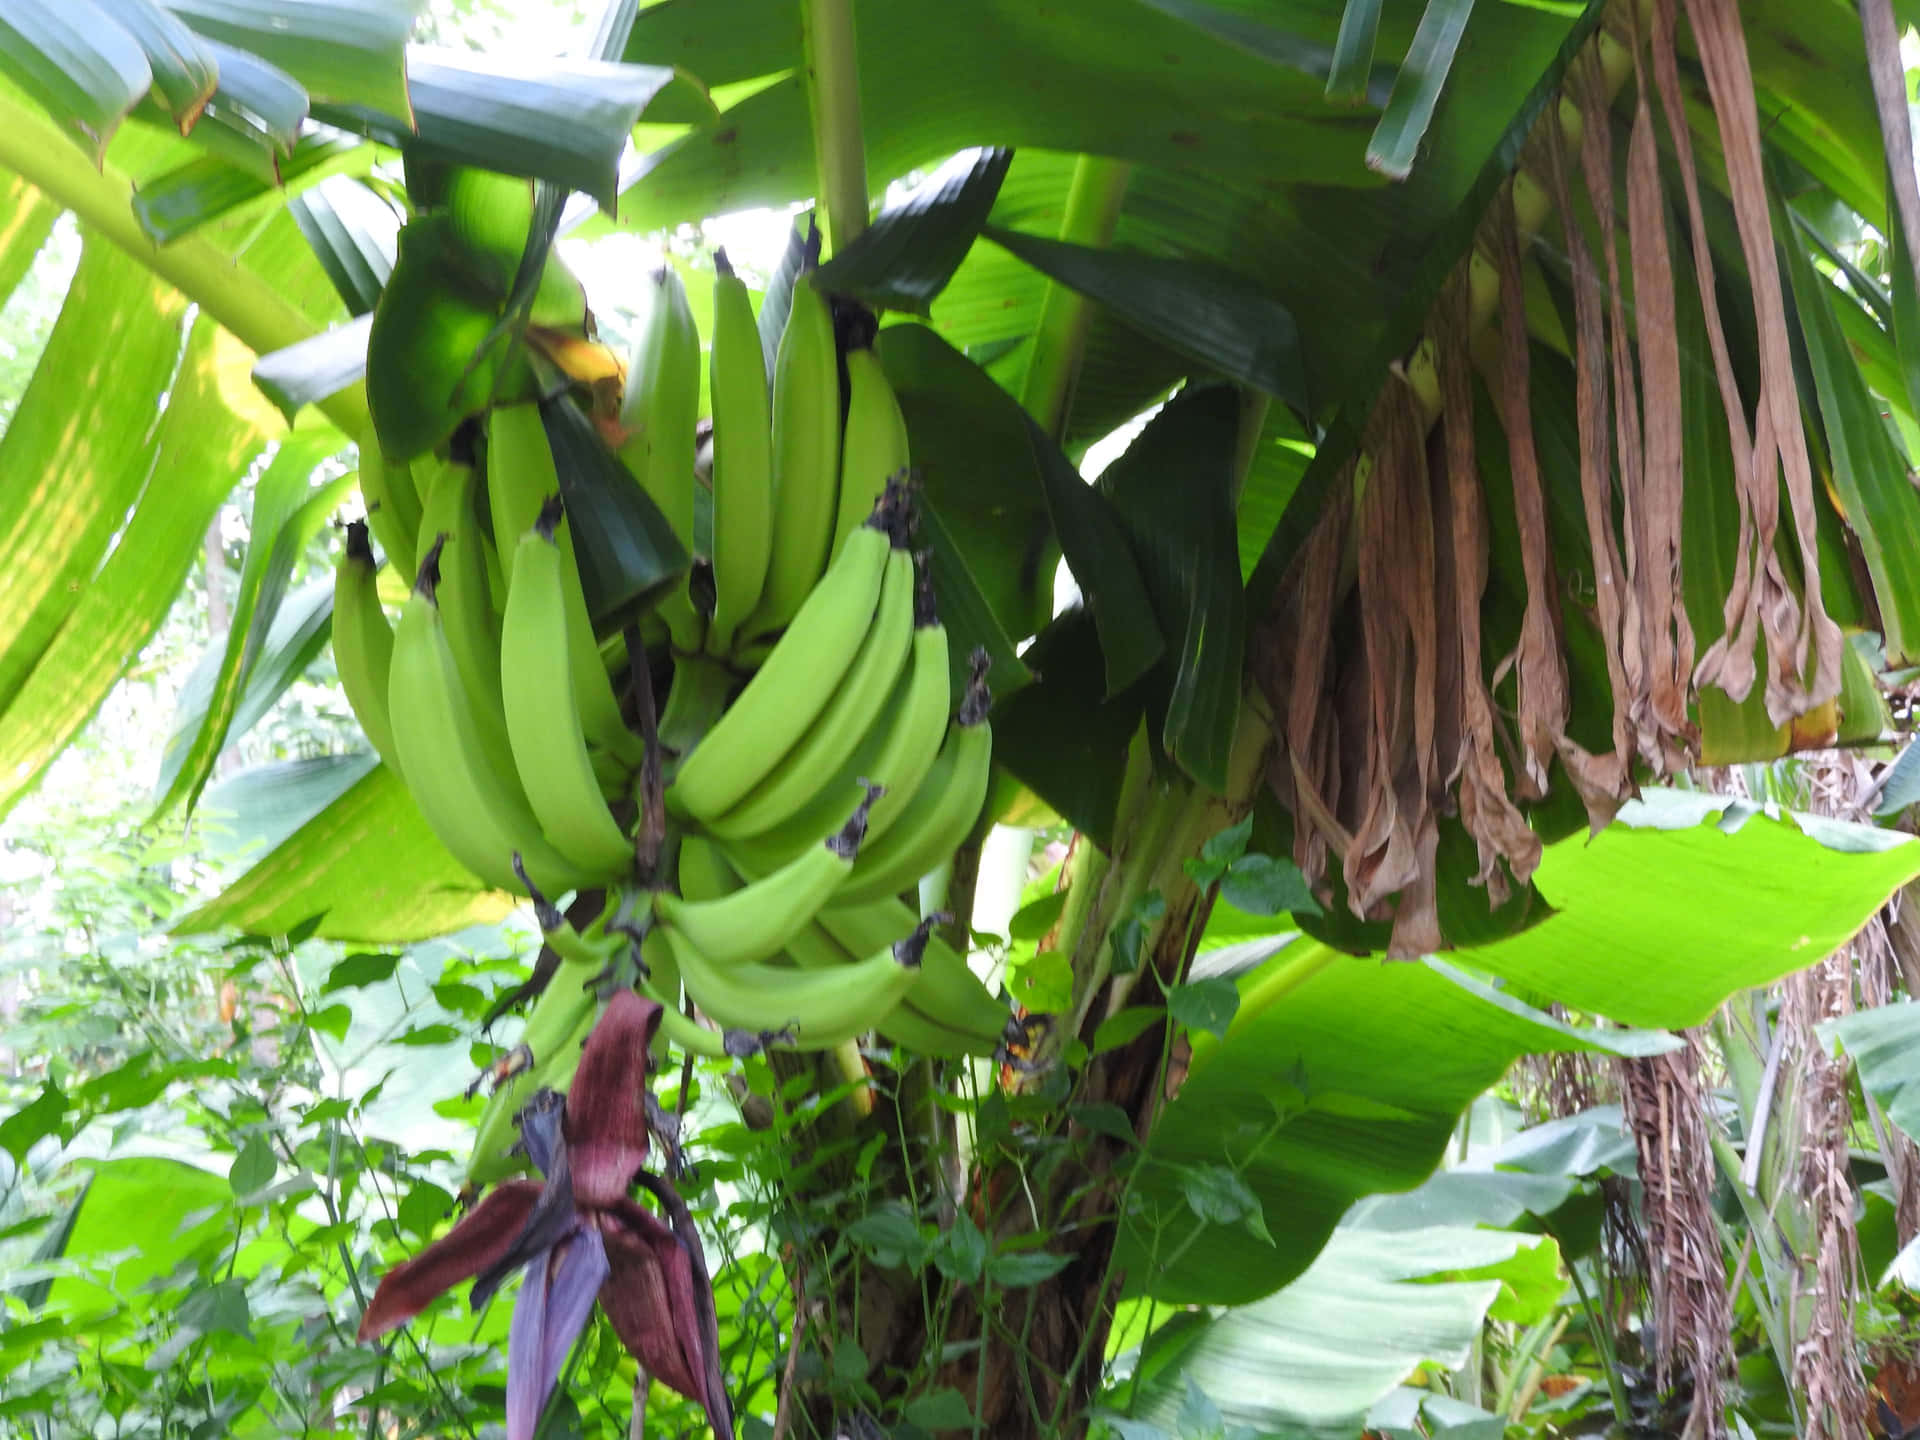 A lush green landscape of the banana trees